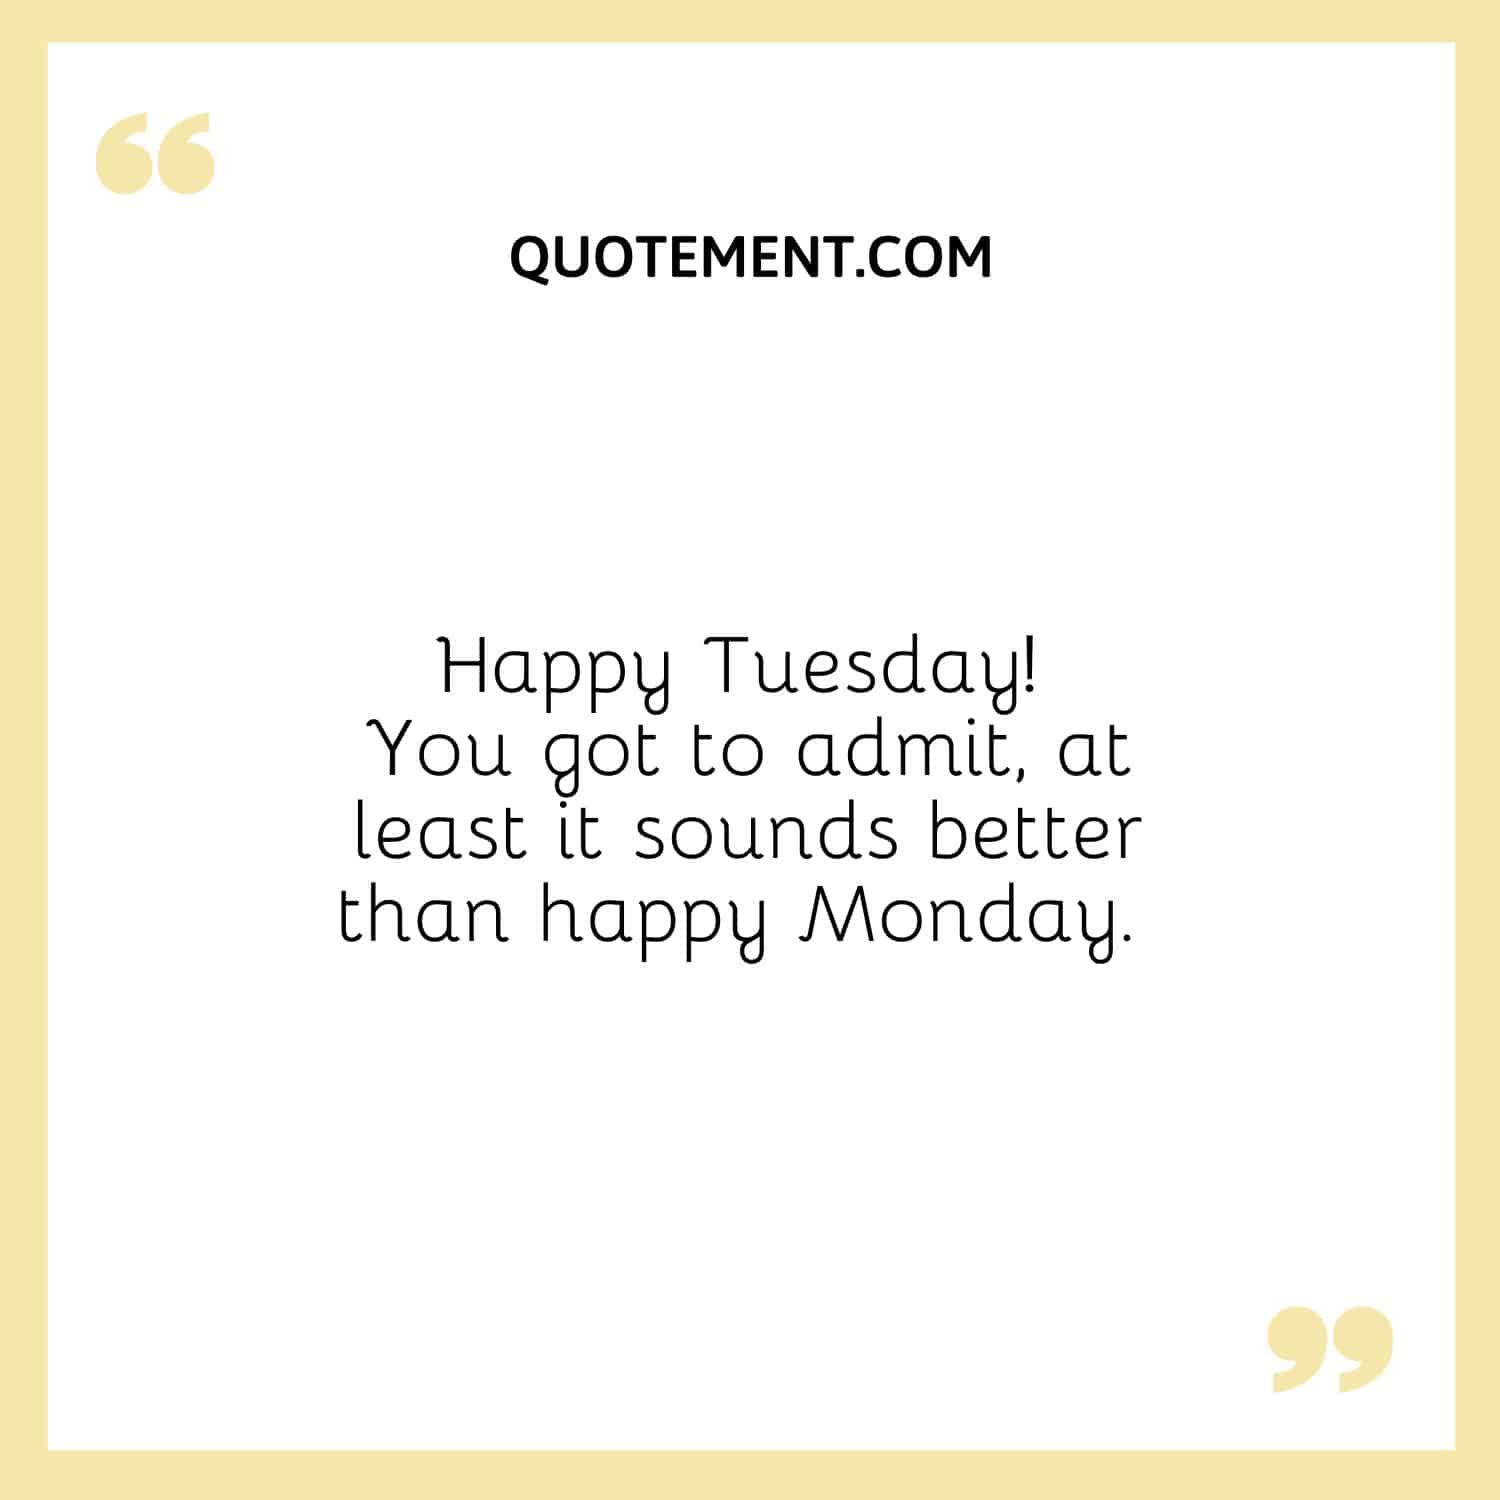 Happy Tuesday! You got to admit, at least it sounds better than happy Monday. 